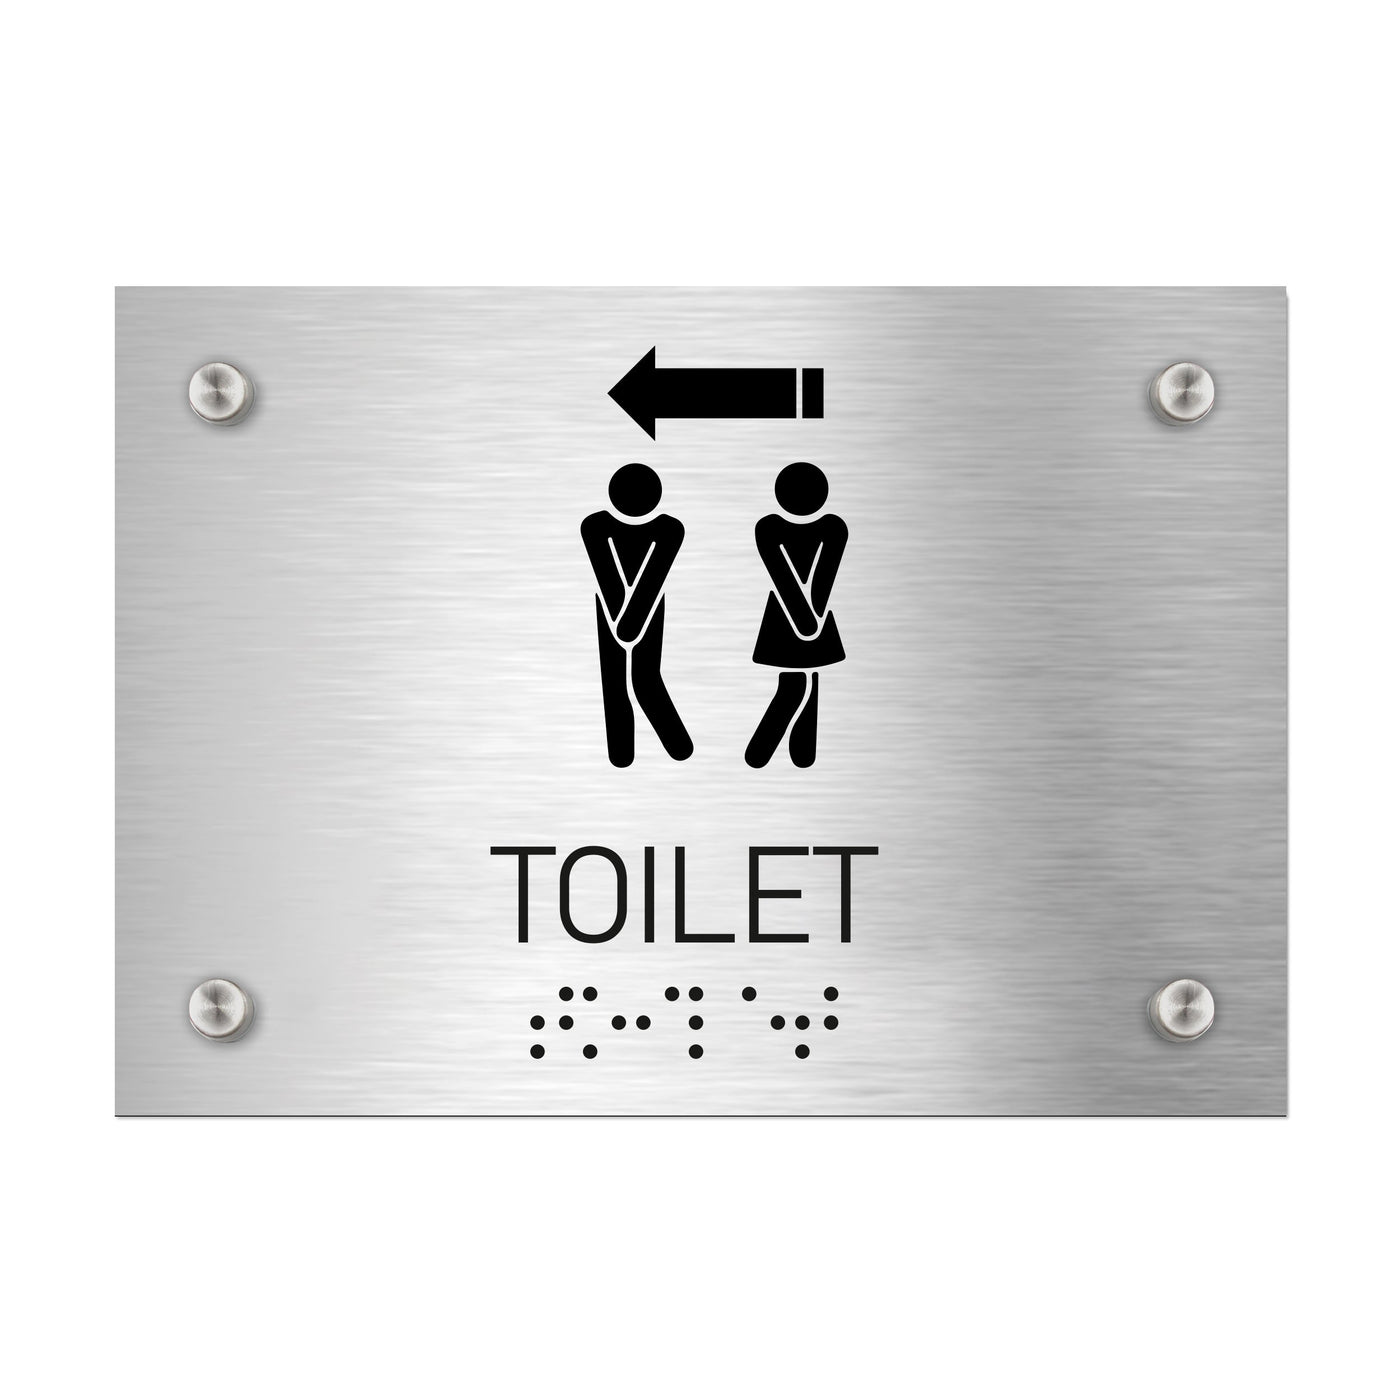 Bathroom Signs - Unisex Toilet Directional Sign - Stainless Steel